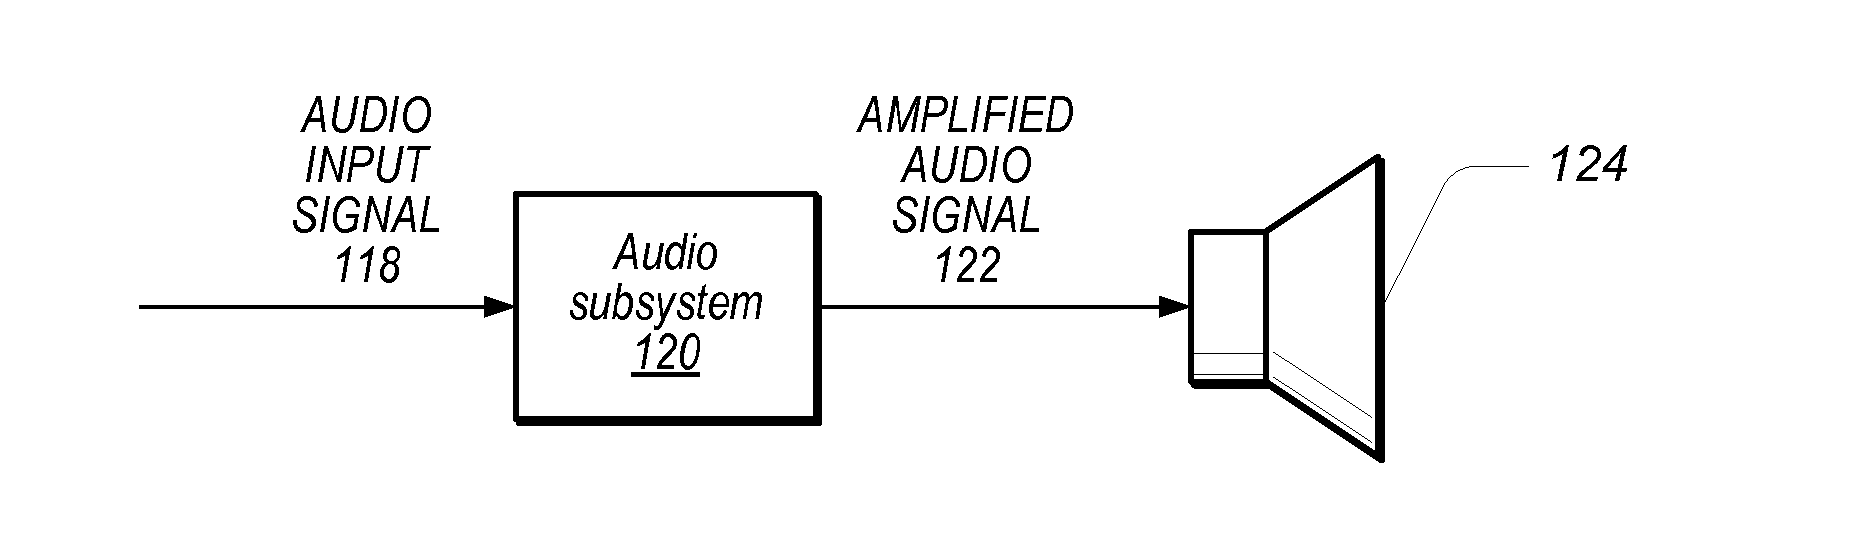 Output Power Limiter in an Audio Amplifier